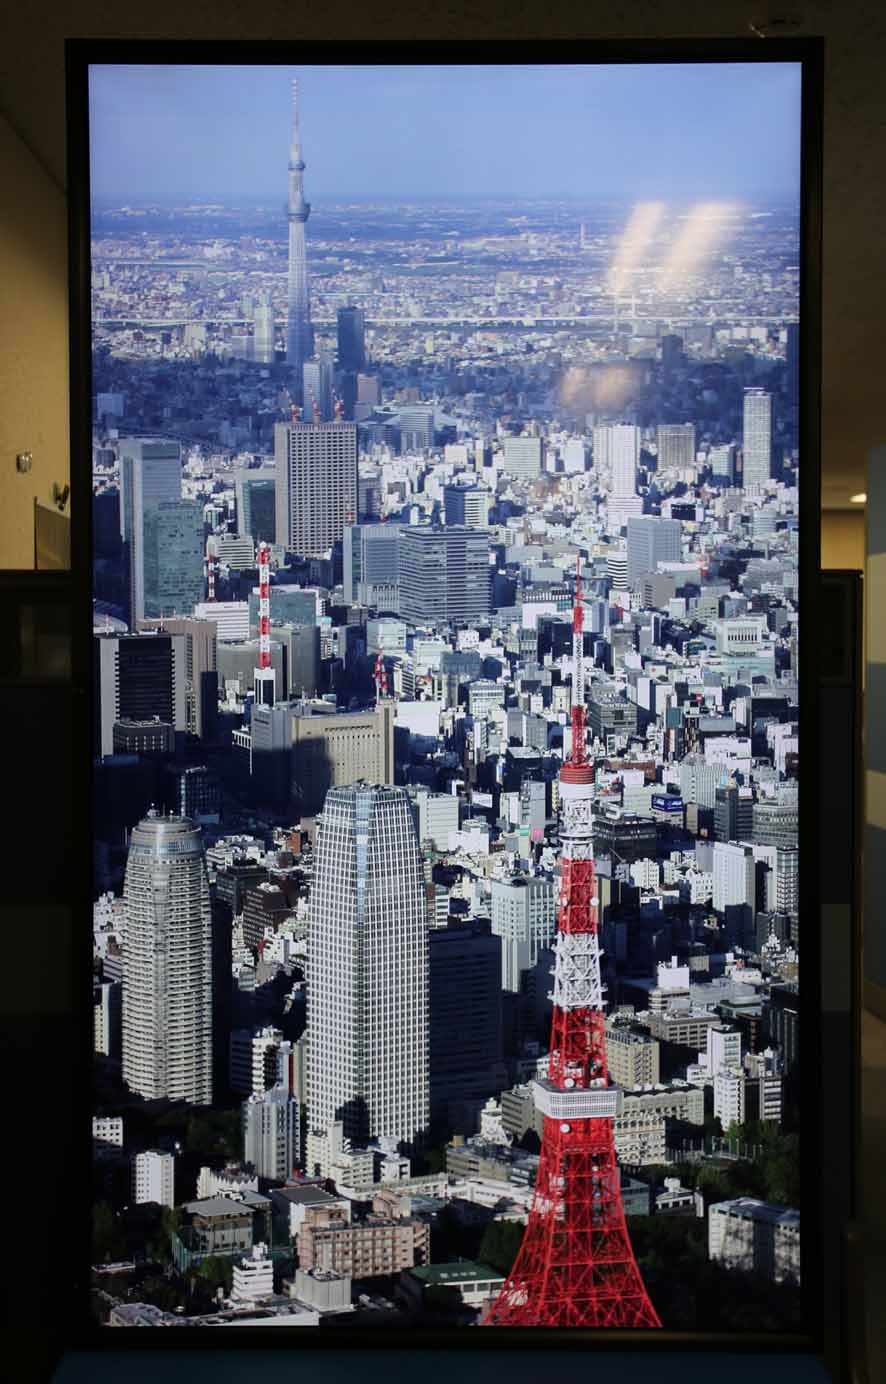 Demo of HTML5 content in web browser on large 4K portrait display.